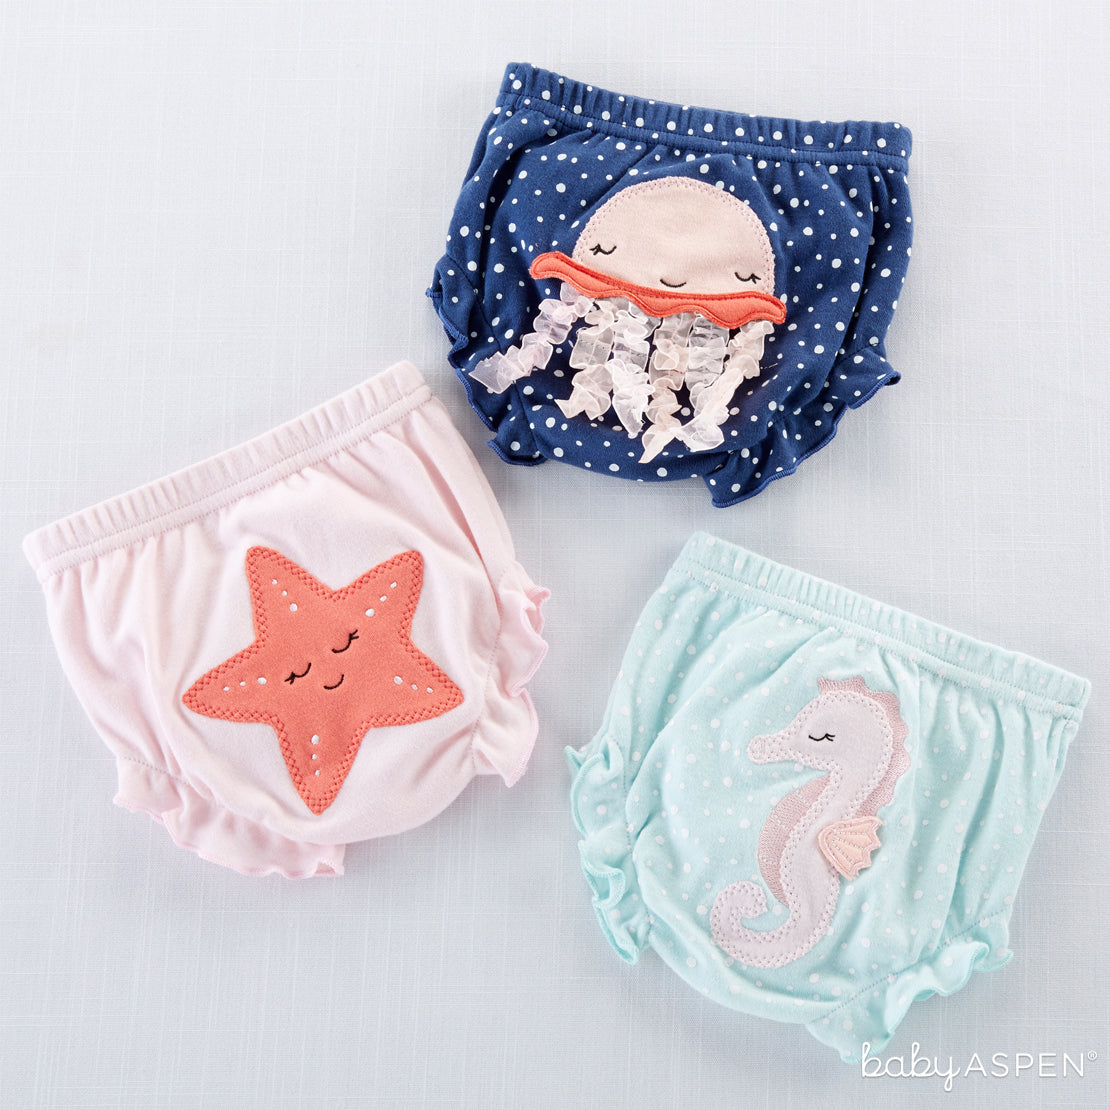 Assortment of Under The Sea 3-Piece Diaper Covers - Girl | Brilliant Beach Baby Gifts + A Giveaway | Baby Aspen